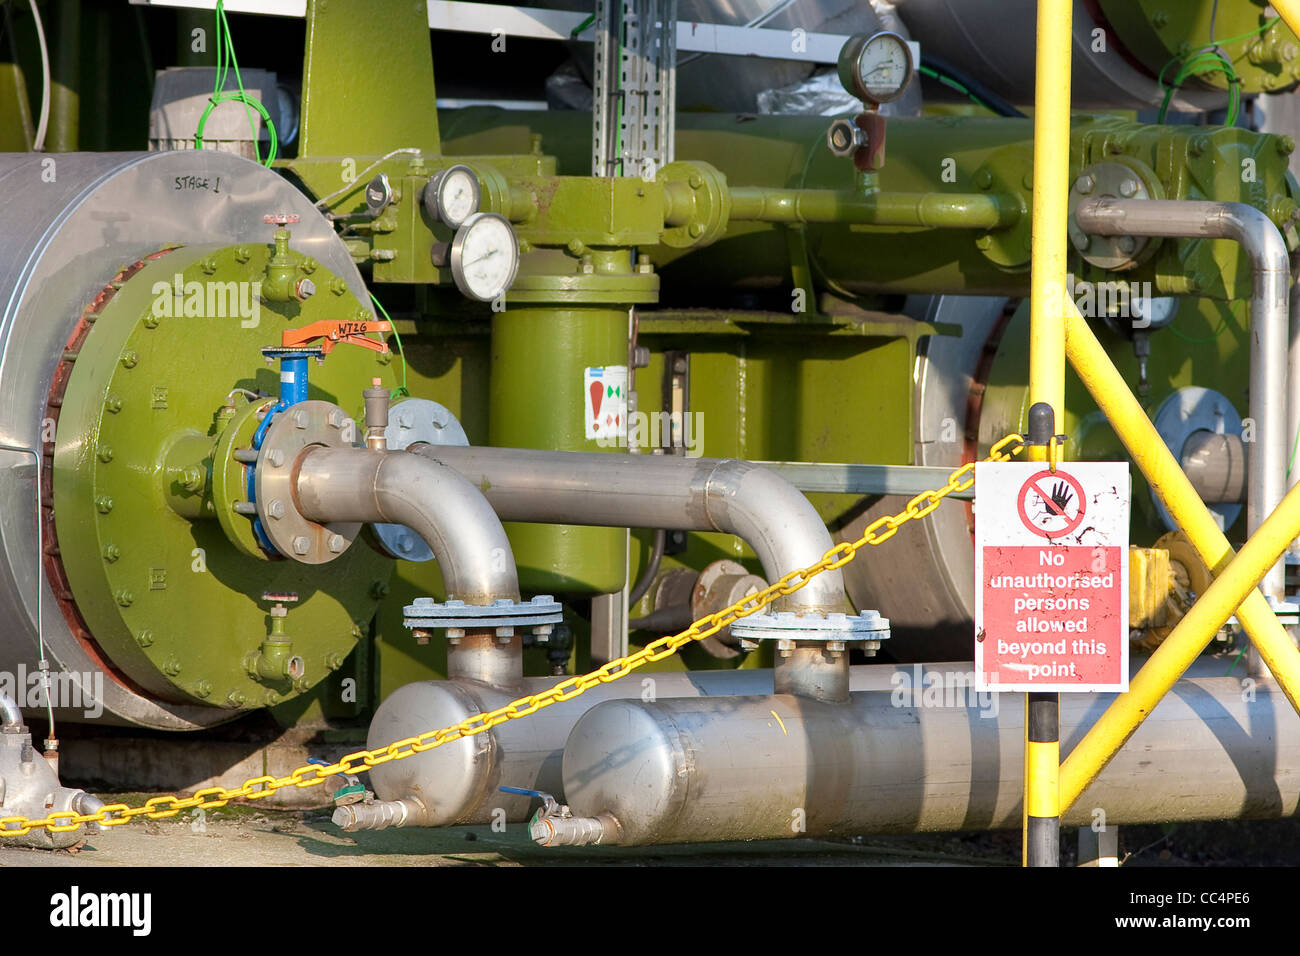 Green Industrial Boilers and Pipework with Warning Sign Stock Photo